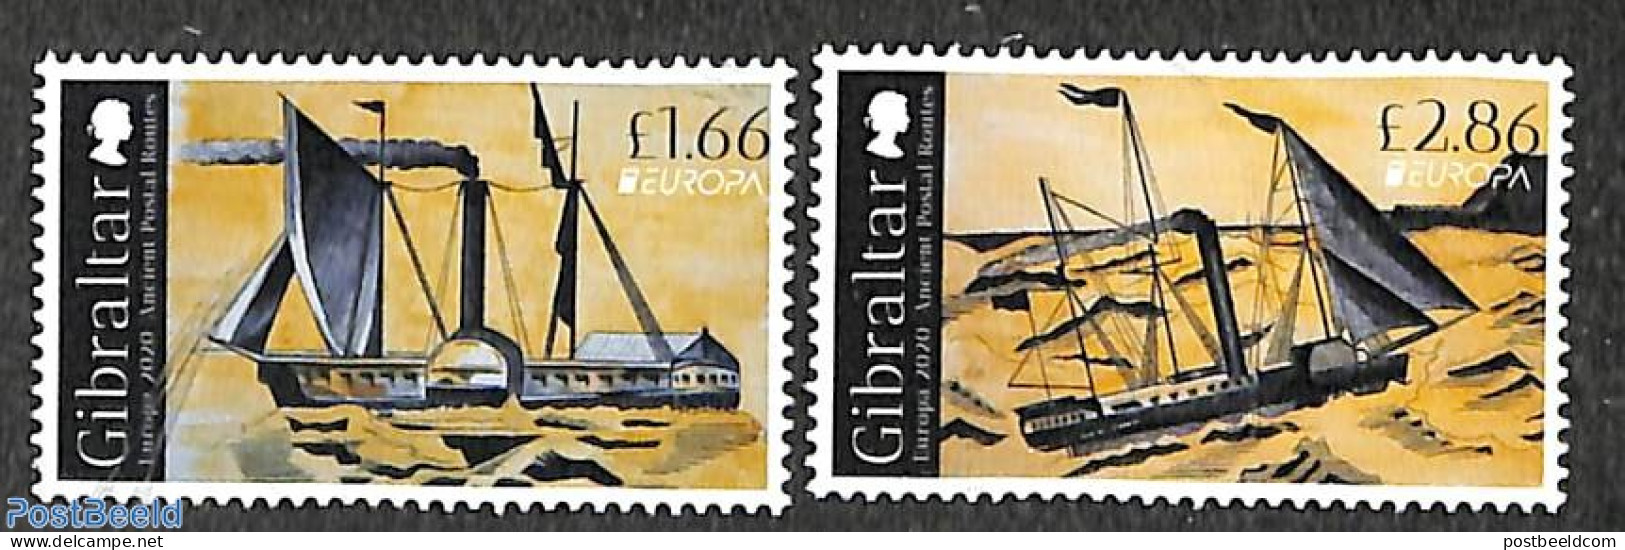 Gibraltar 2020 Europa, Old Postal Roads 2v, Mint NH, History - Transport - Europa (cept) - Post - Ships And Boats - Post